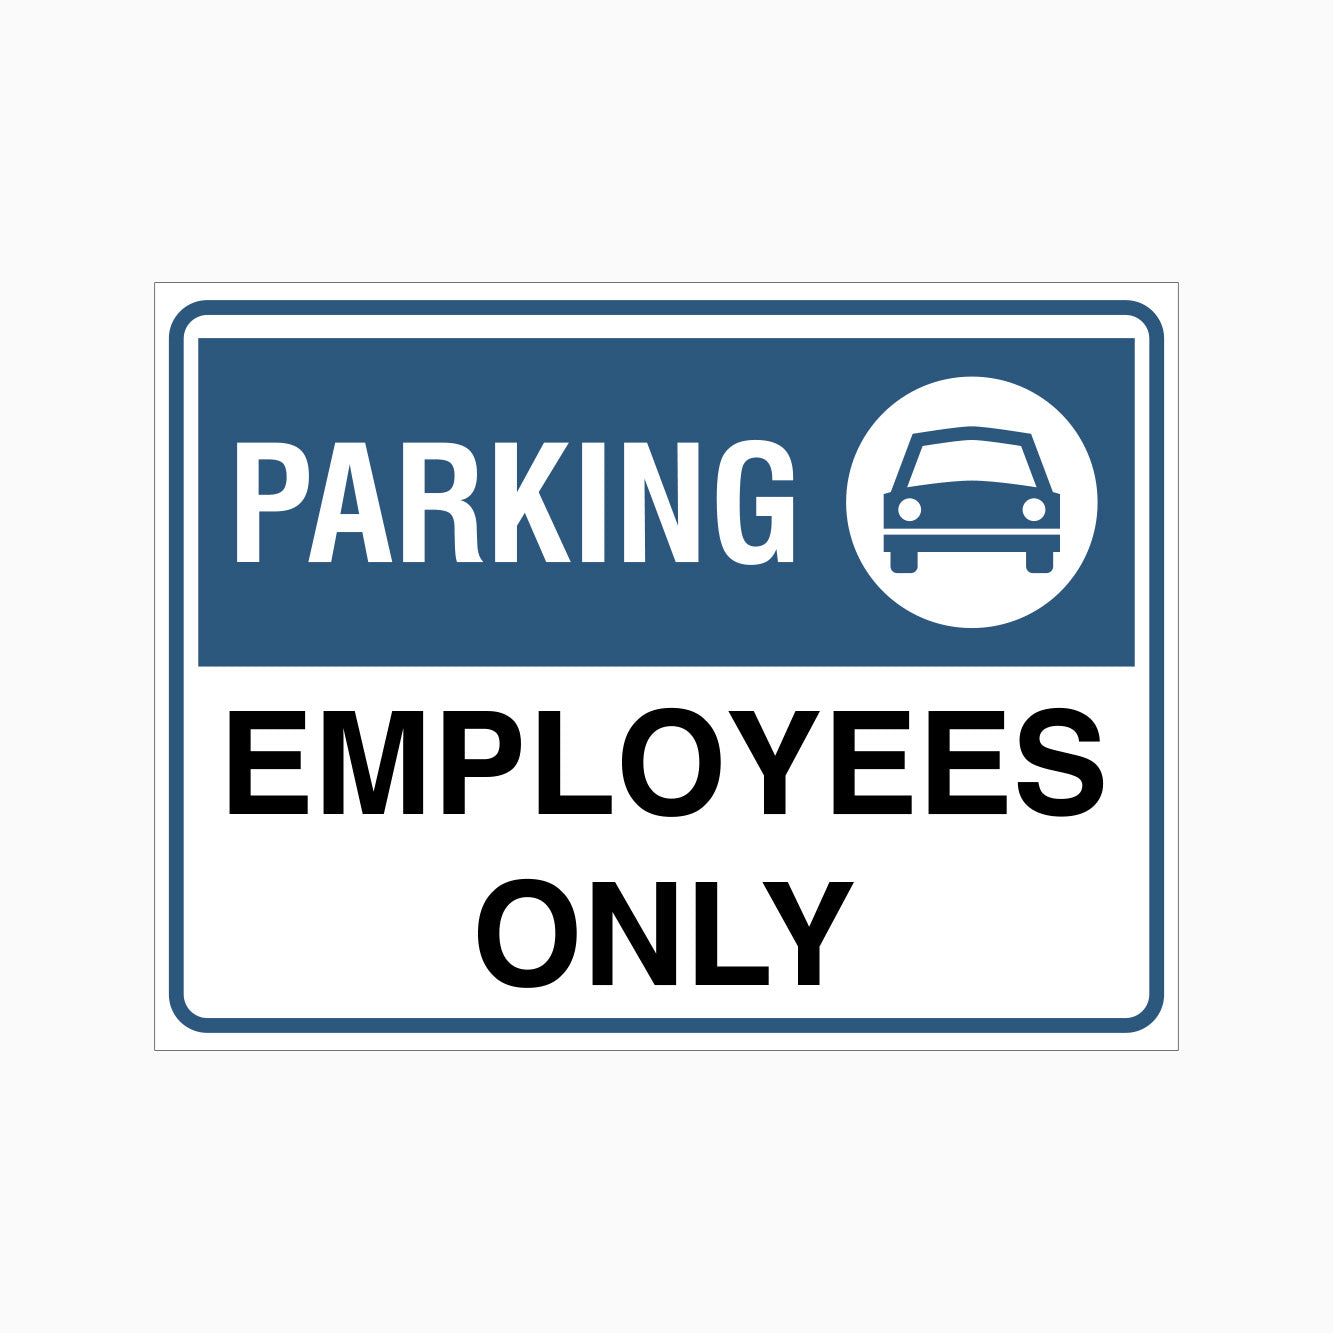 PARKING EMPLOYEES ONLY SIGN - GET SIGNS